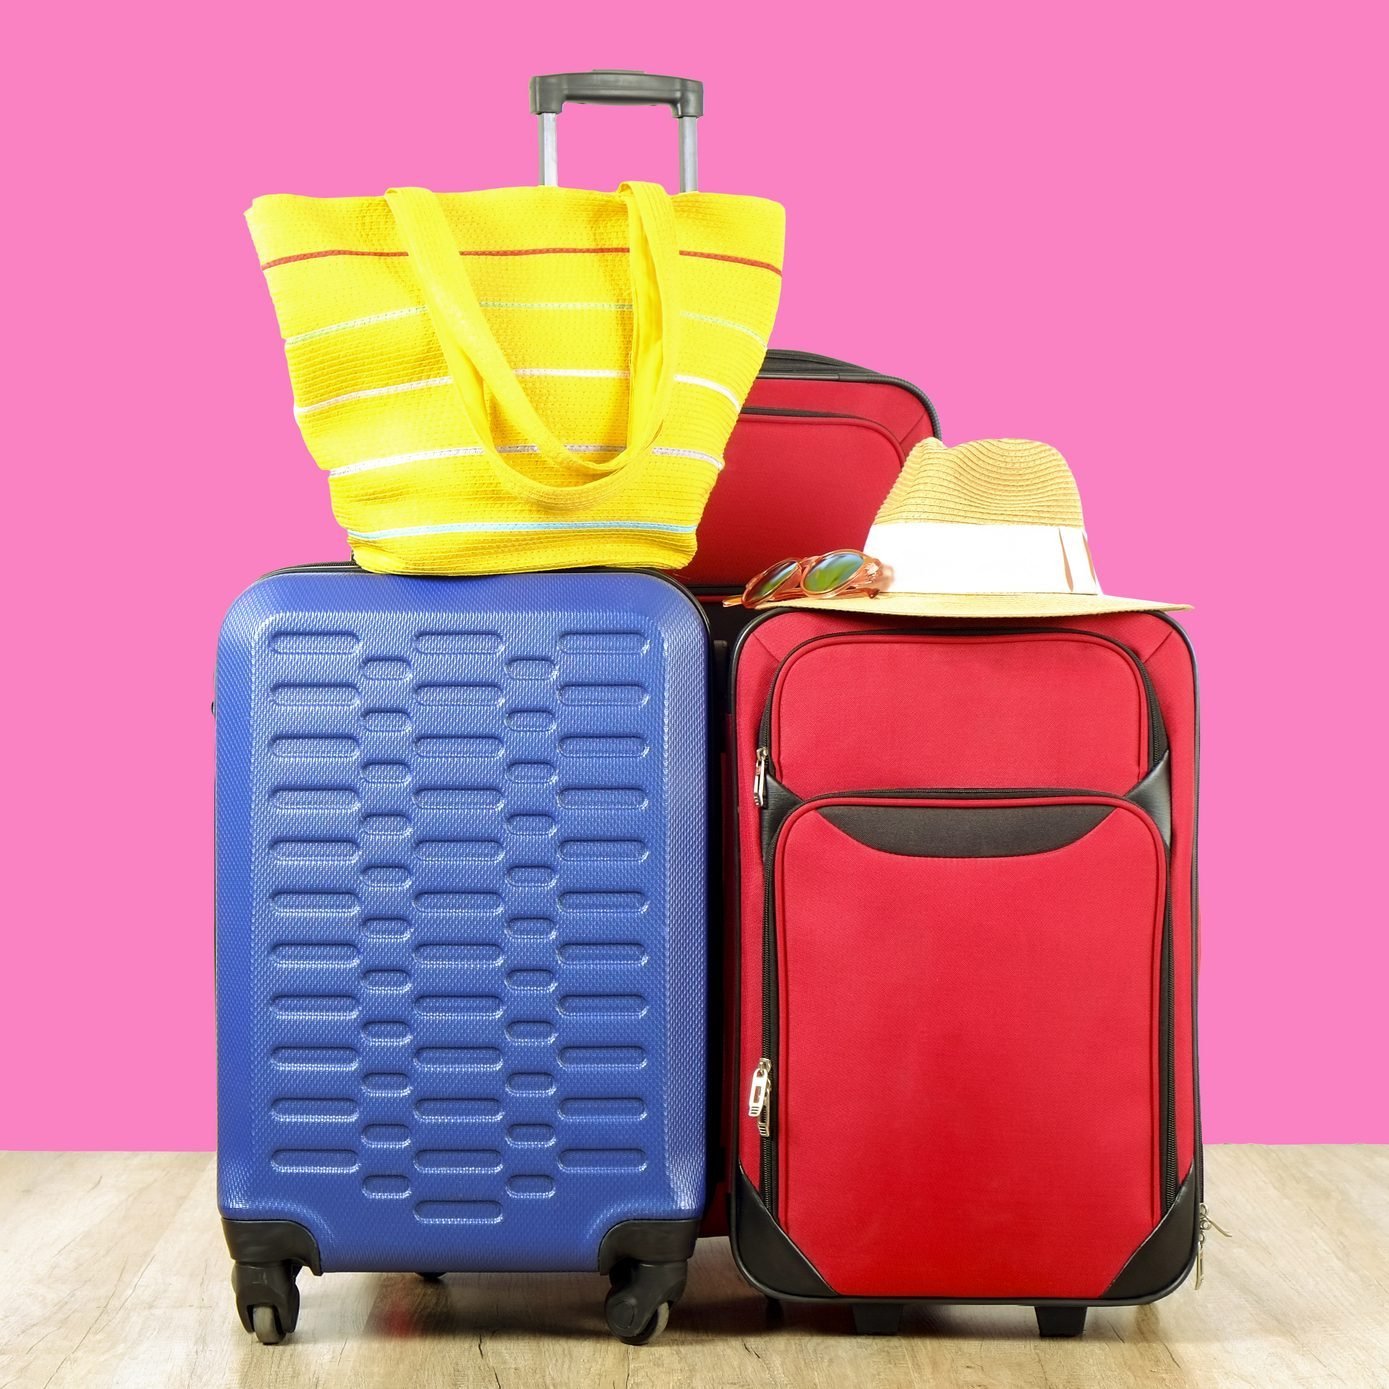 How To Find The Best Luggage Repair Shop